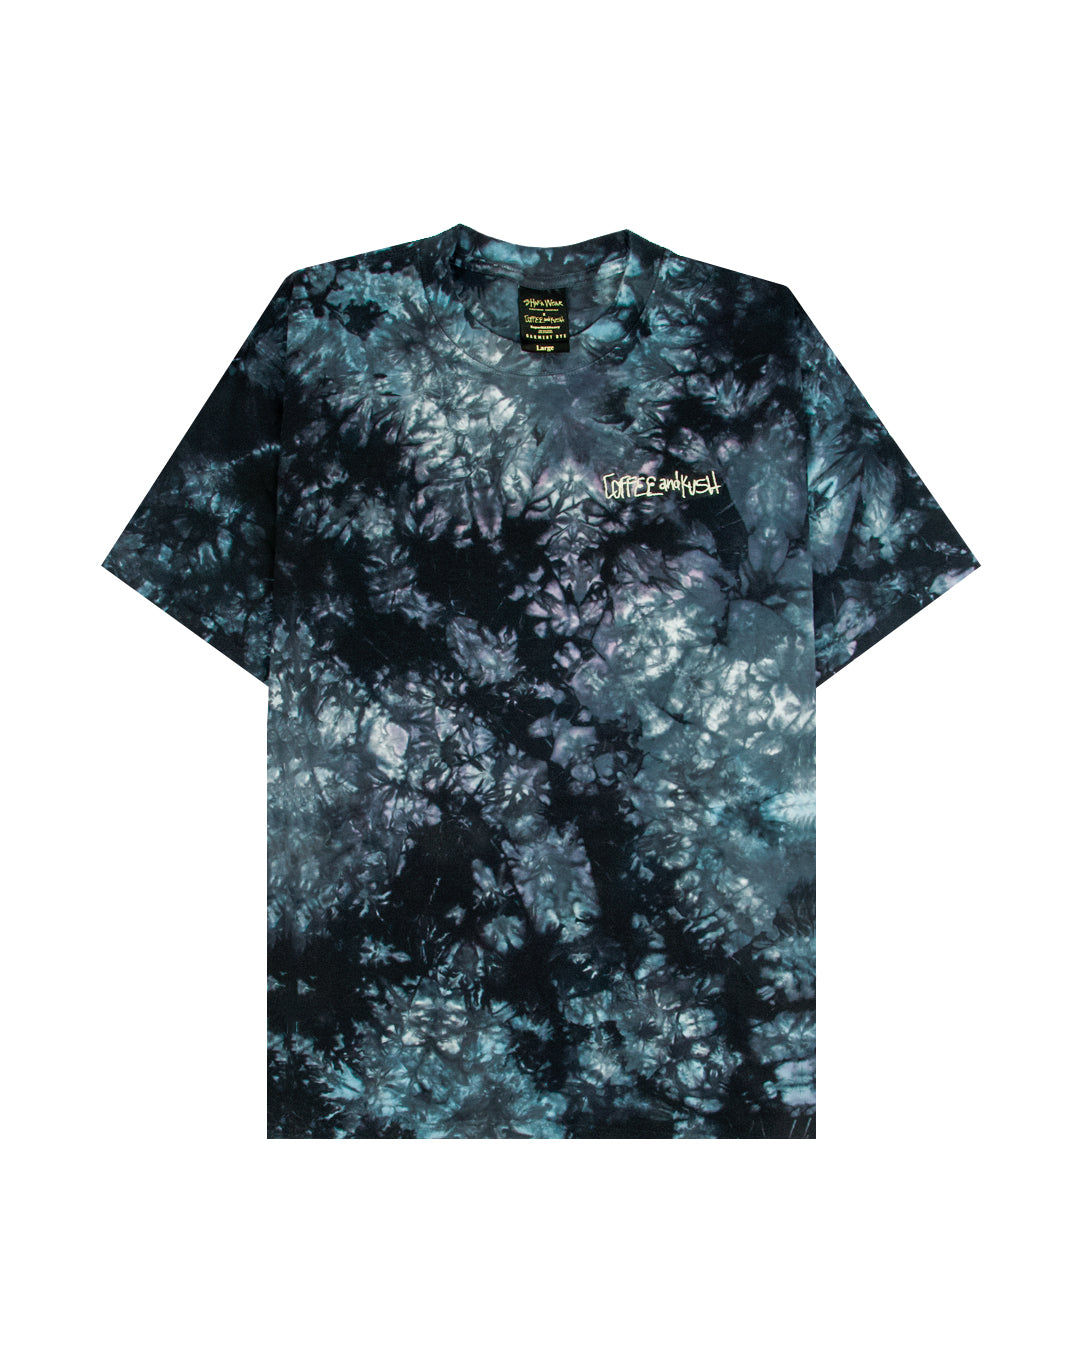 Light Tie-Dye Shaka Shirt, (embroidered color front logo) – Campervan Coffee